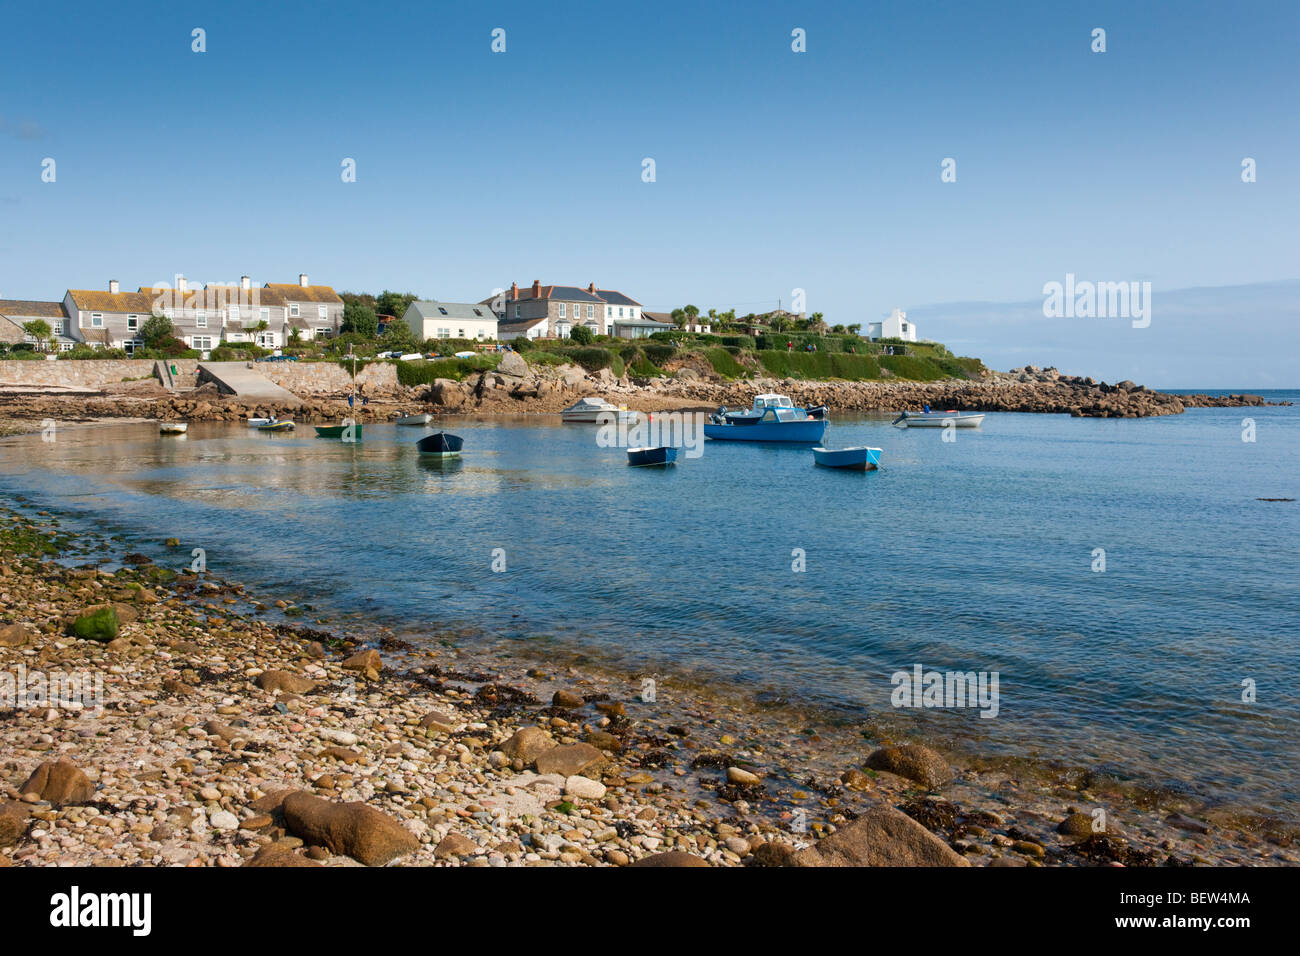 Old Town Bay, St. Marien, Isles of Scilly, Tolman Punkt Stockfoto